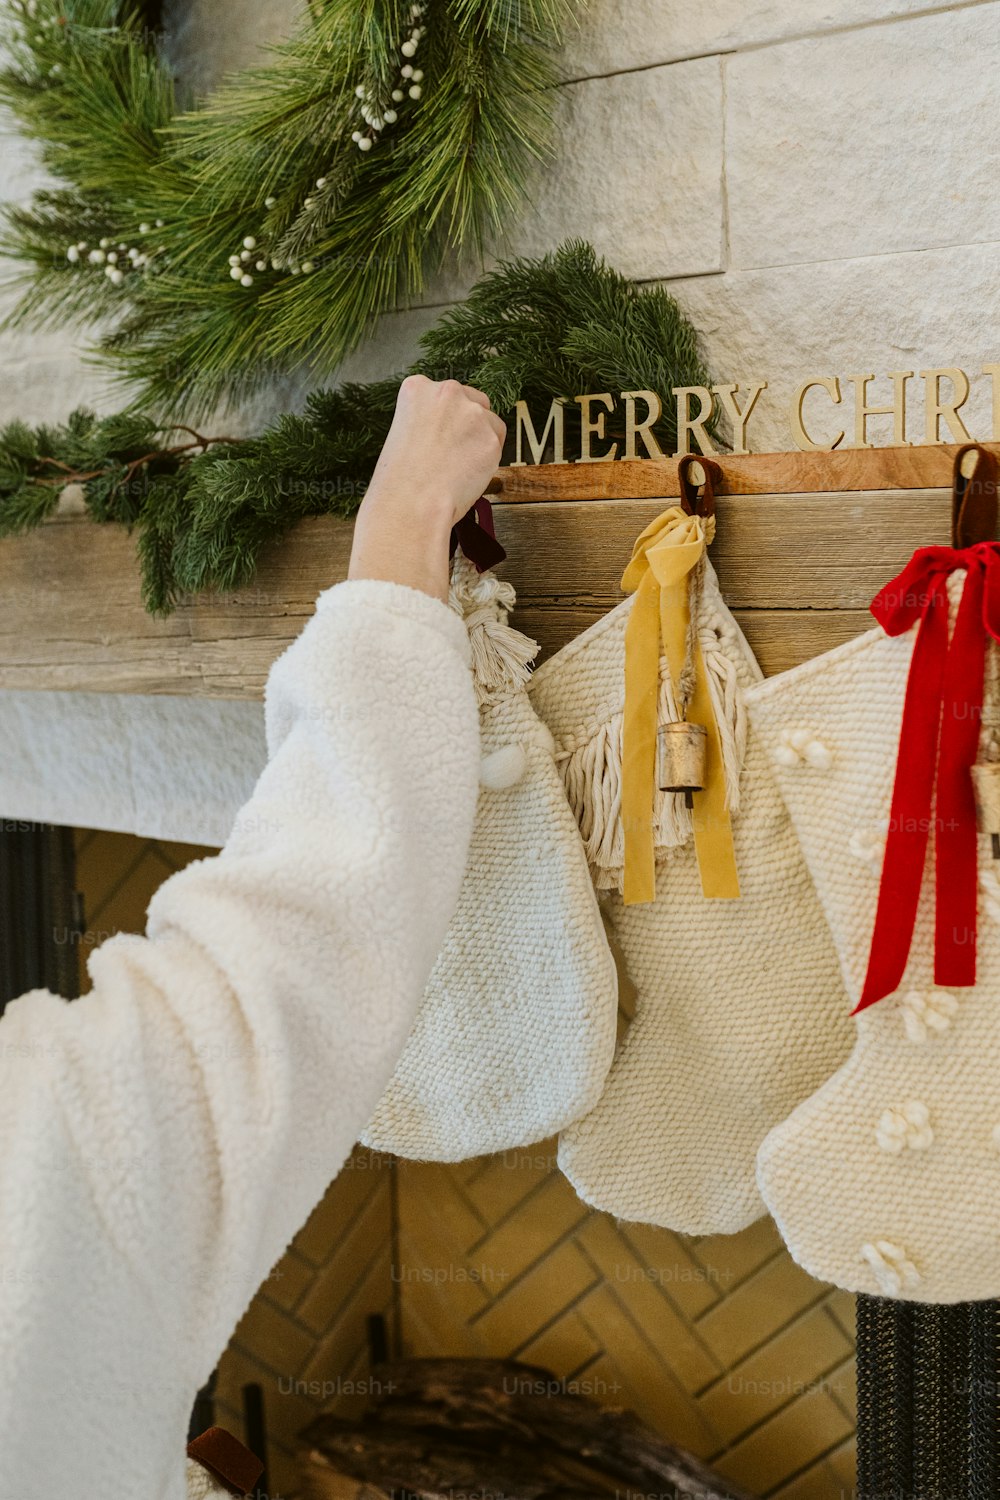 a person hanging stockings on a fireplace with a merry christmas sign